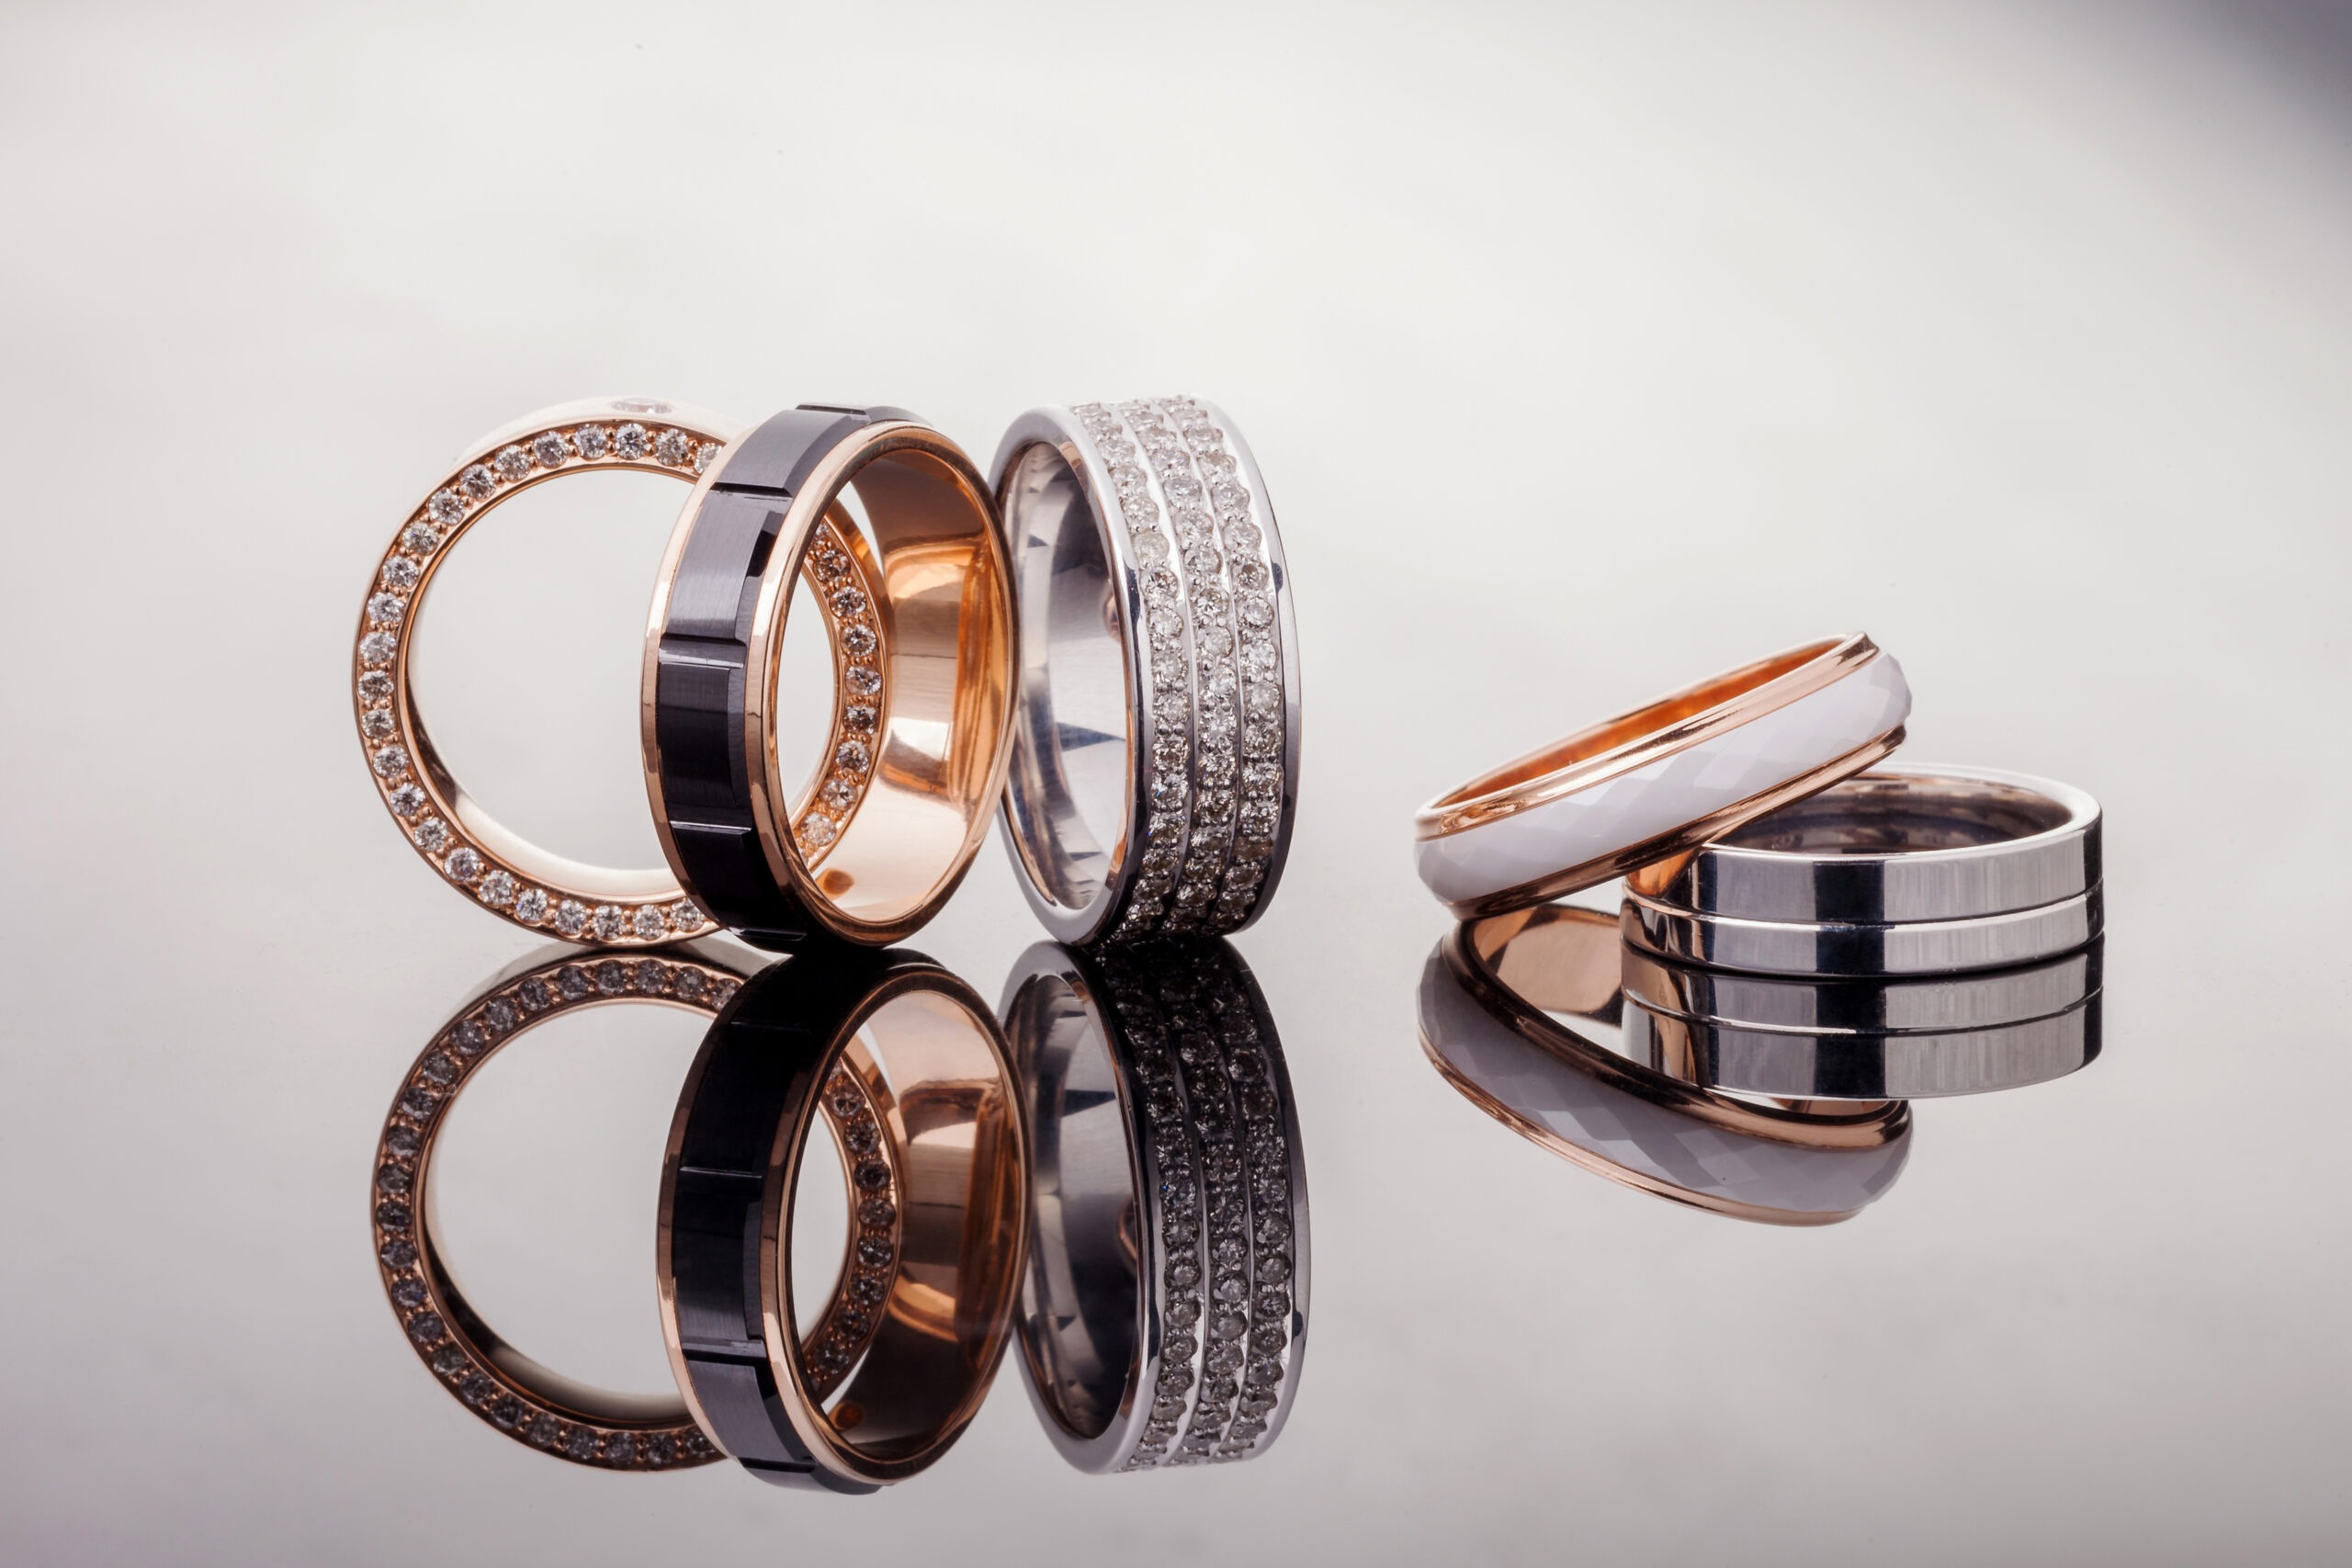 silver-gold-platinum-rings-of-different-styles-on-the-gray-background-of-reflections